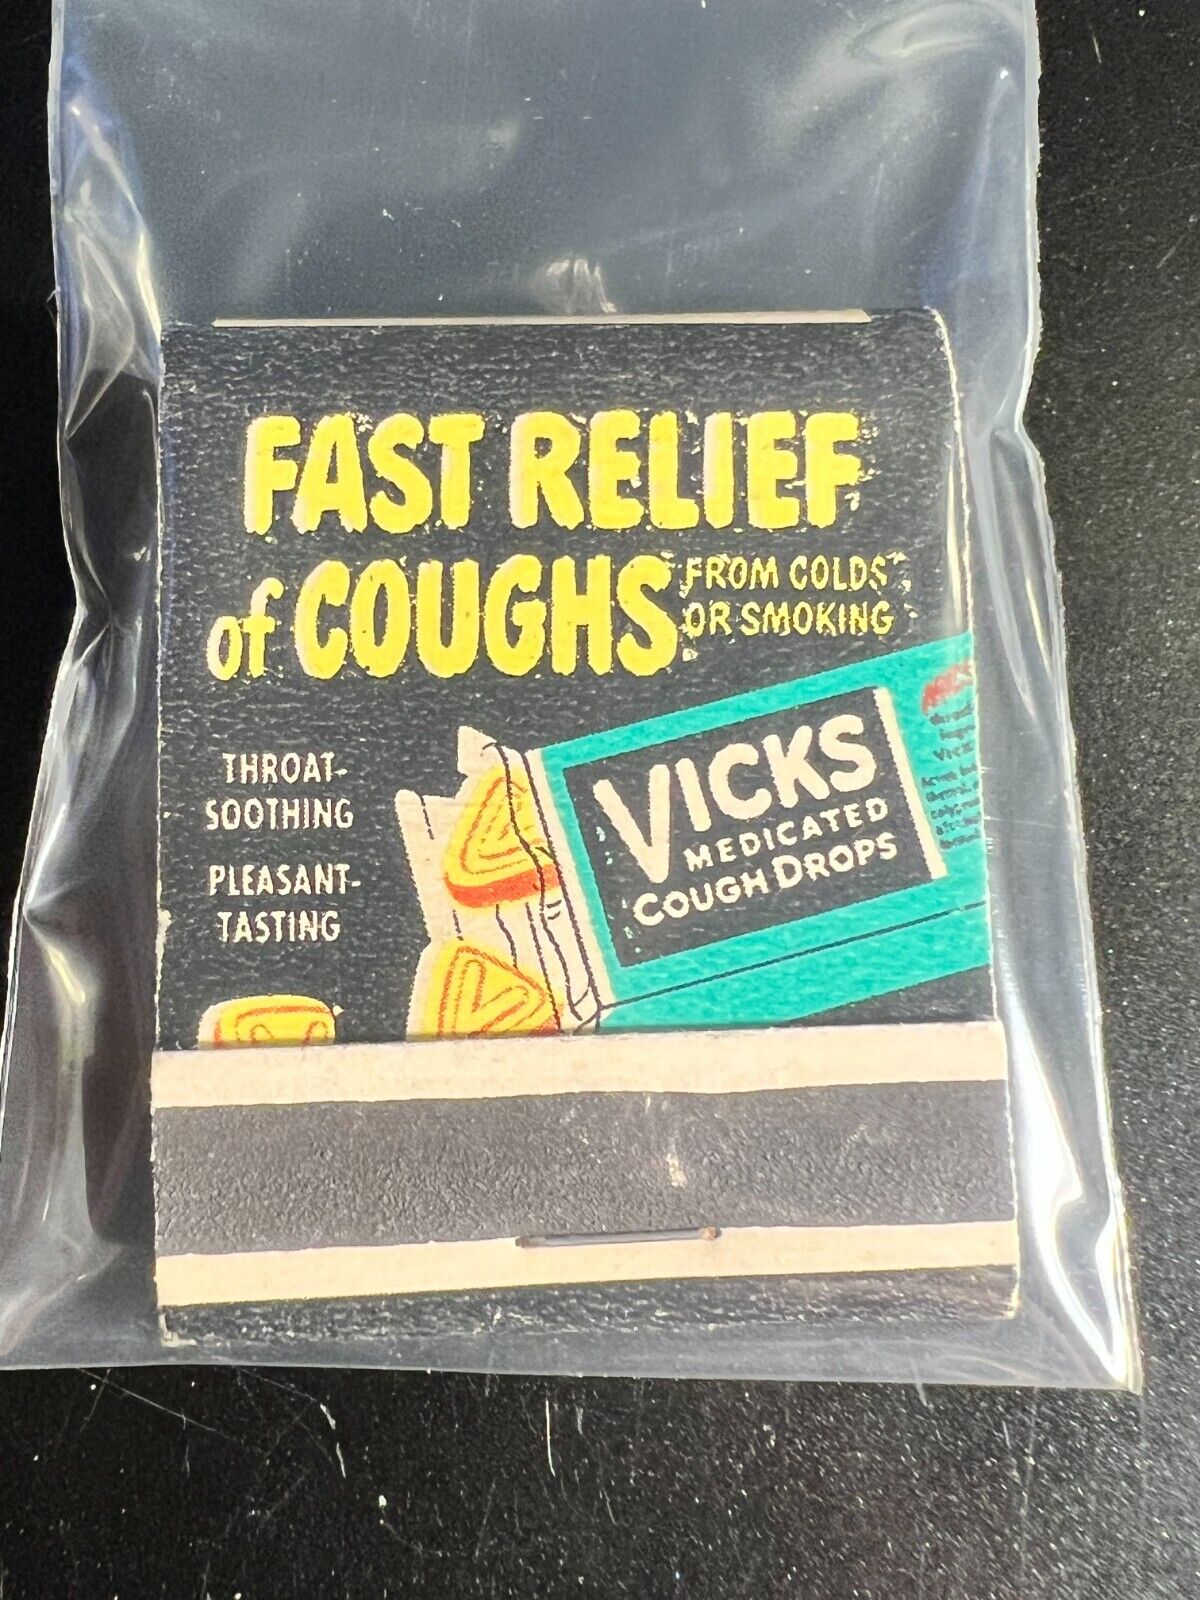 MATCHBOOK - FAST RELIEF OF COUGHS - VICKS MEDICATED COUGH DROPS - UNSTRUCK